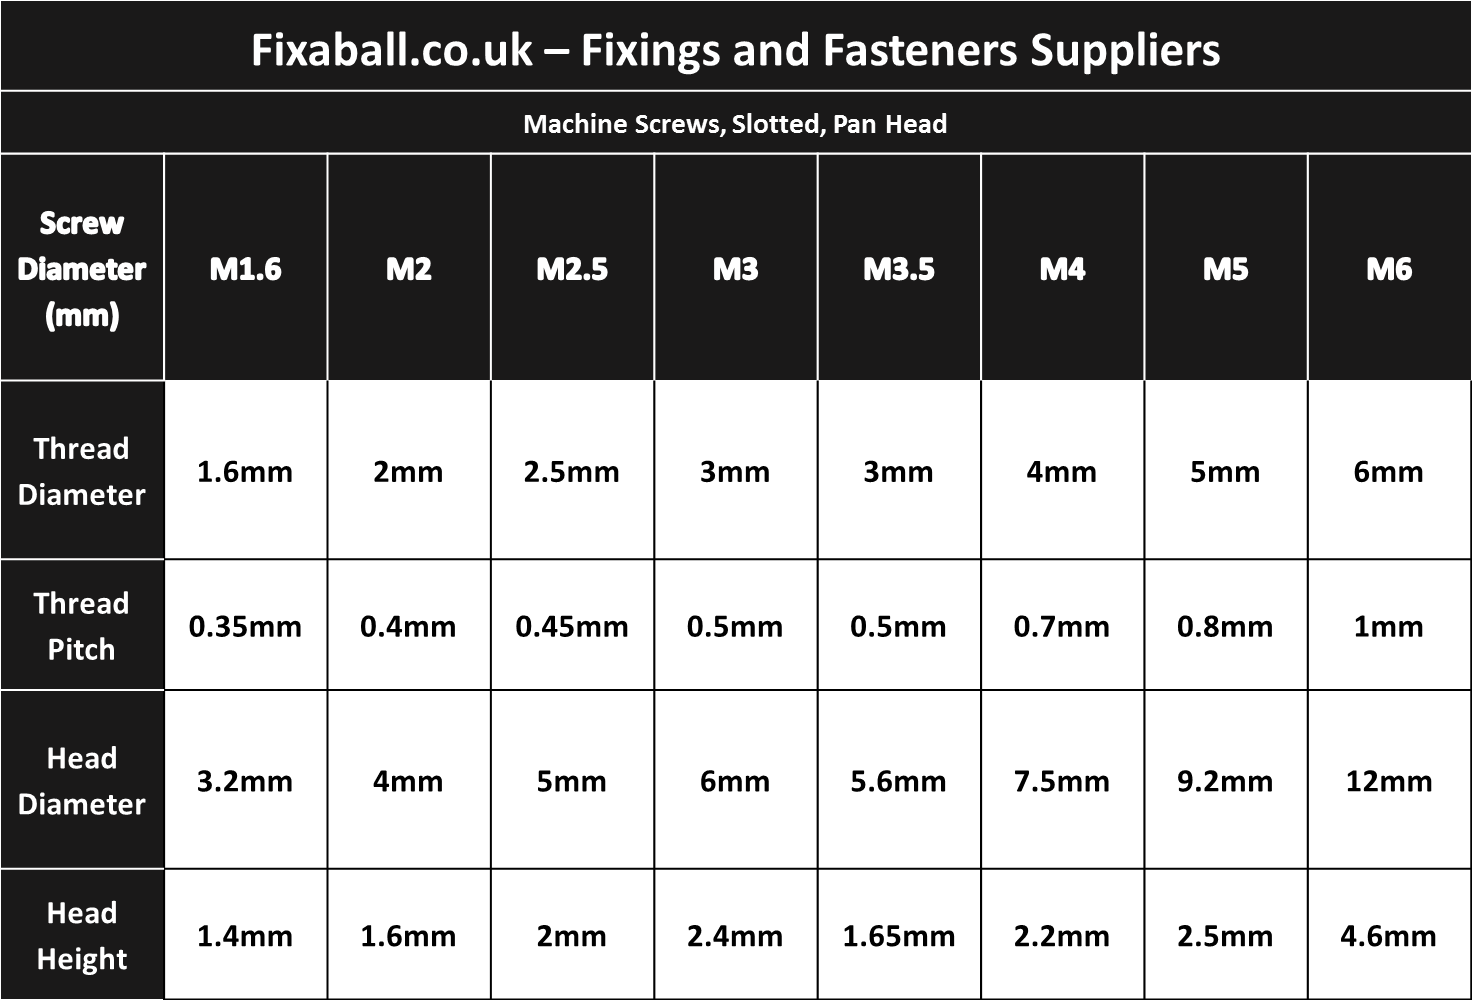 M5 Machine Screws Slotted Pan Head Brass DIN 85 - Fixaball Ltd. Fixings and Fasteners UK